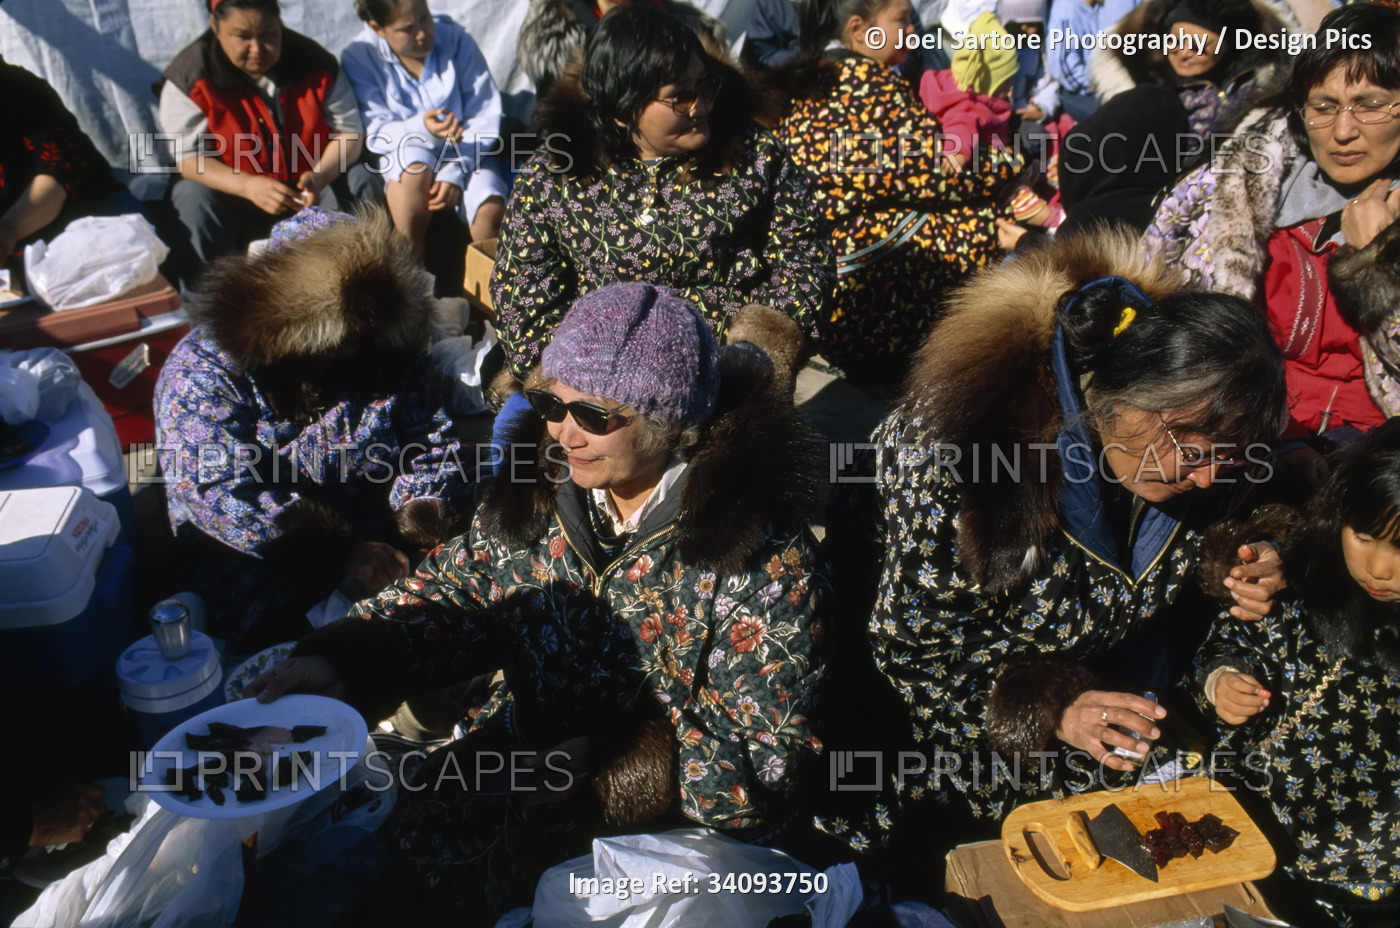 Inuit woman at a gathering; North Slope, Alaska, United States of America